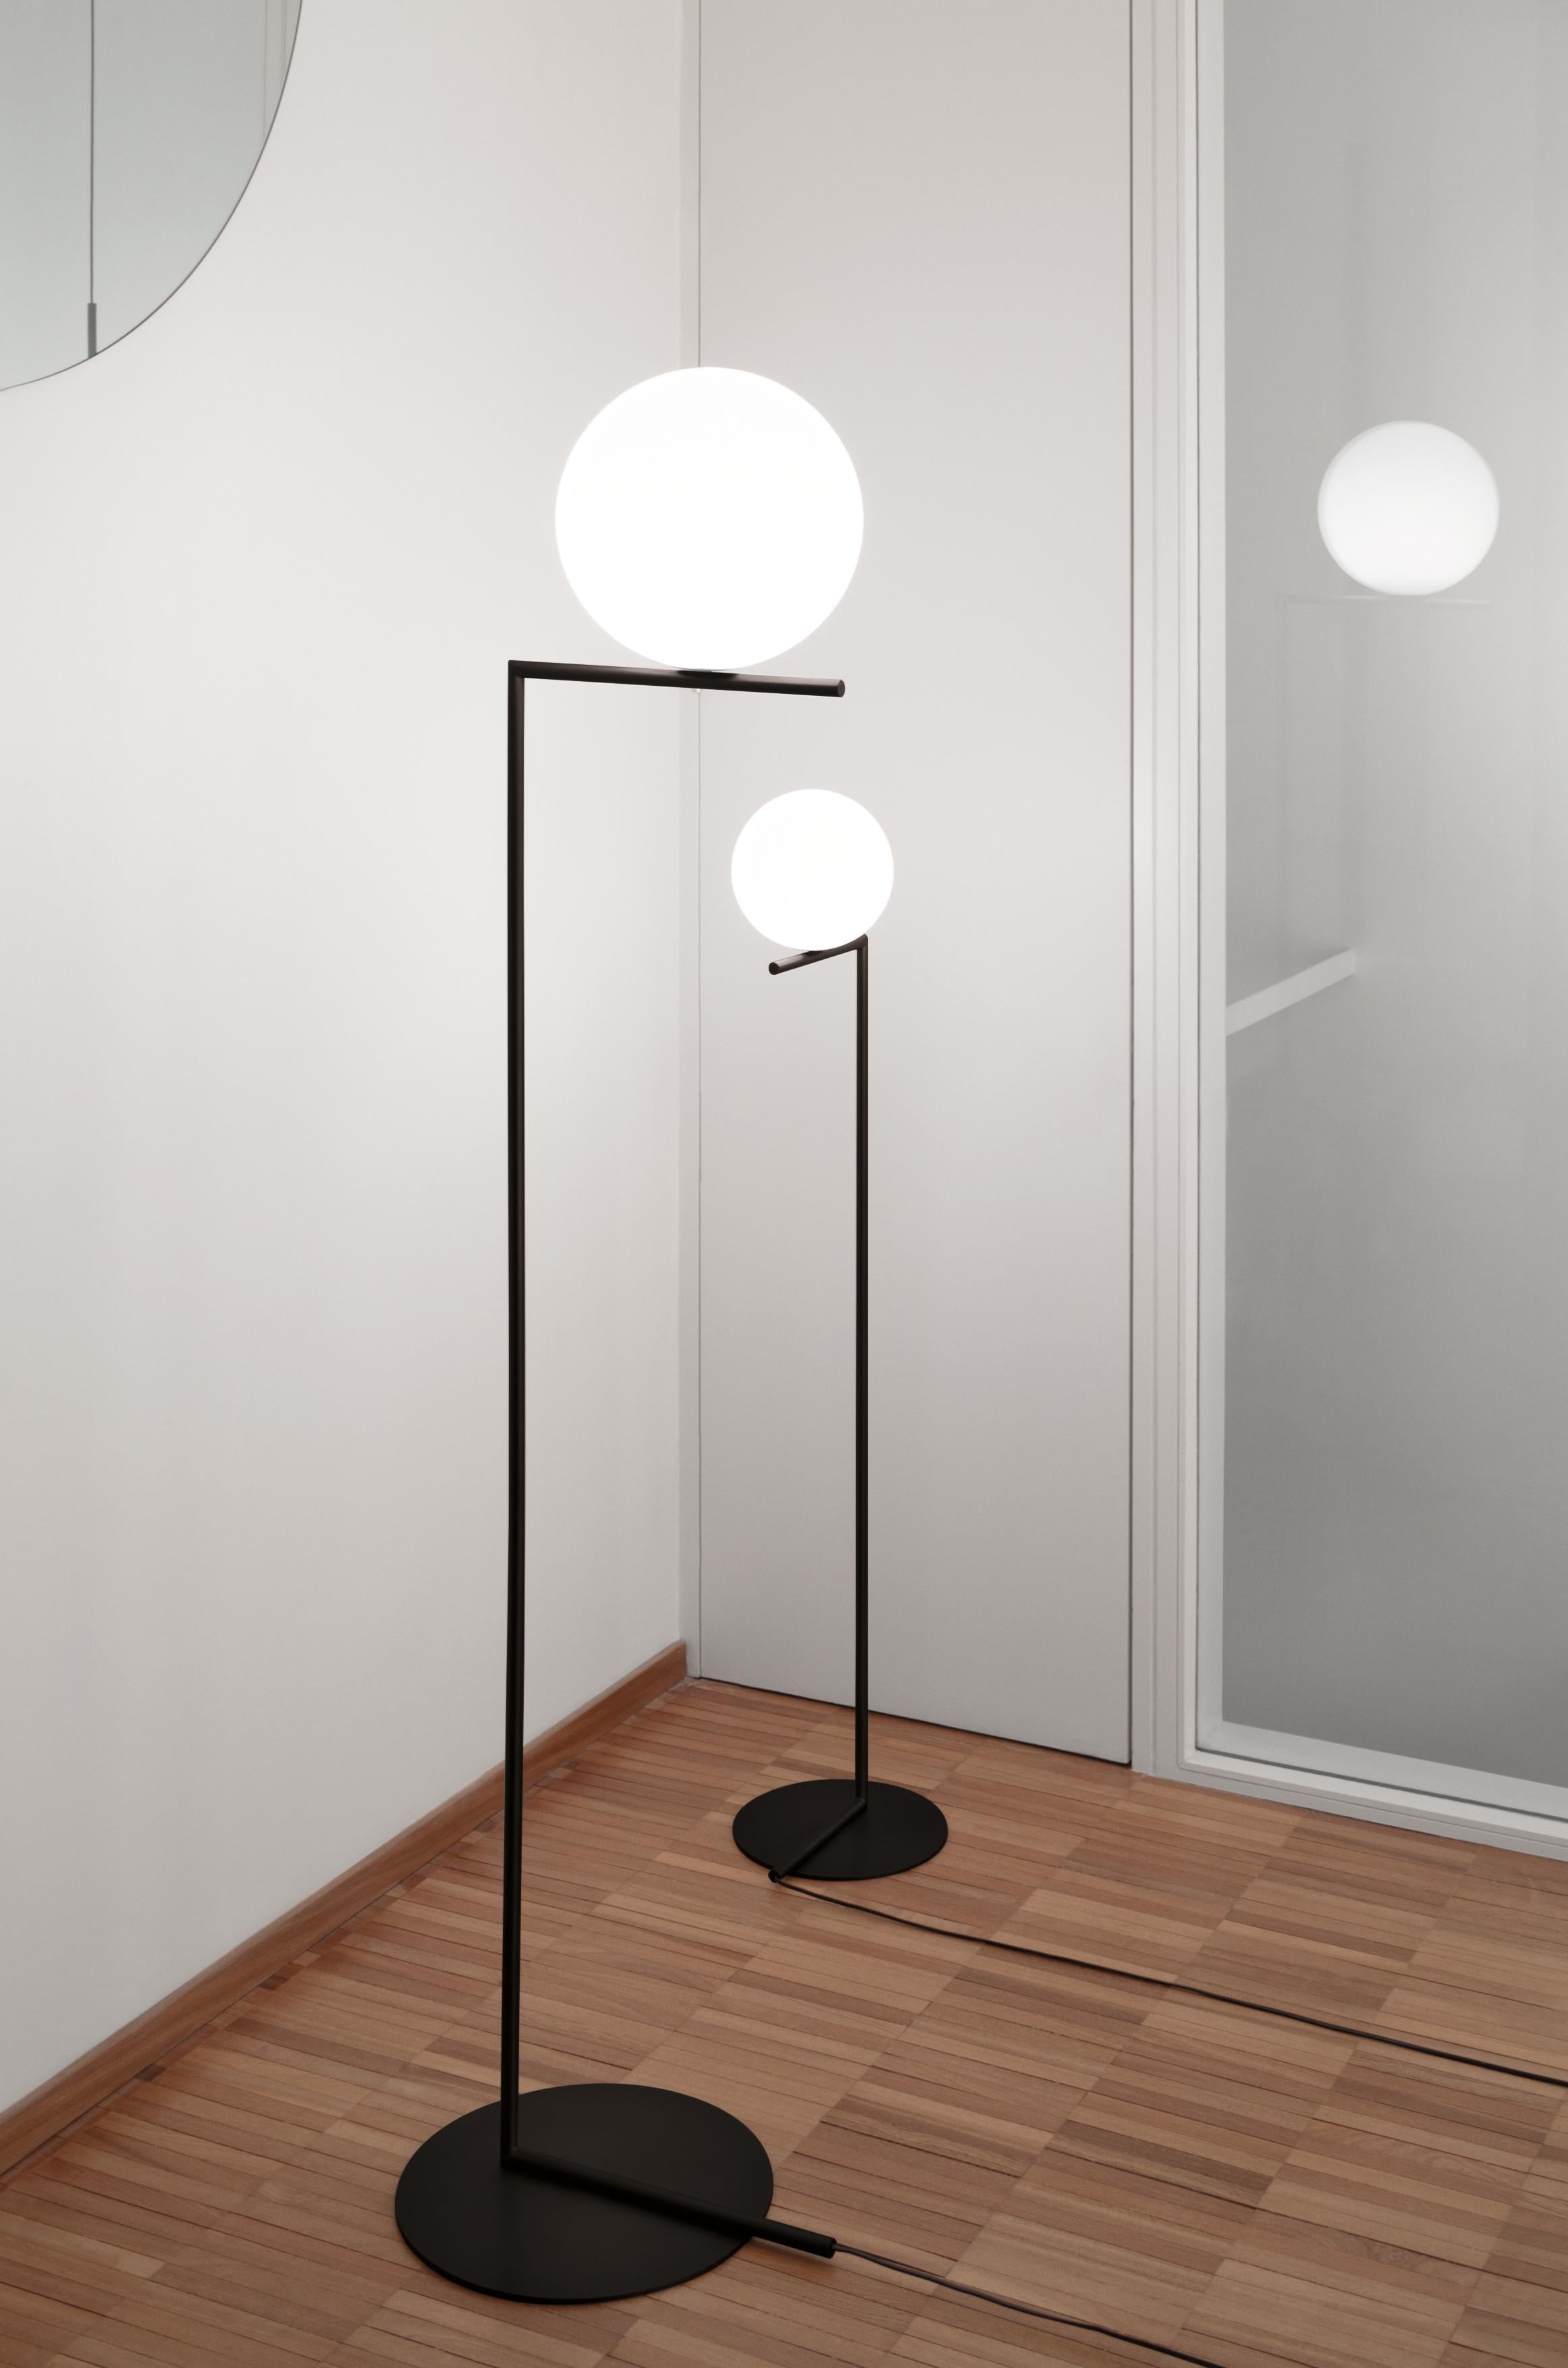 FLOS IC Lights F1 Floor Lamp in Black by Michael Anastassiades

Radiant light, delicate balance: Like the other pieces in his IC light series, the IC lights F-floor lamp showcases designer Michael Anastassiades love of Industrial simplicity as well